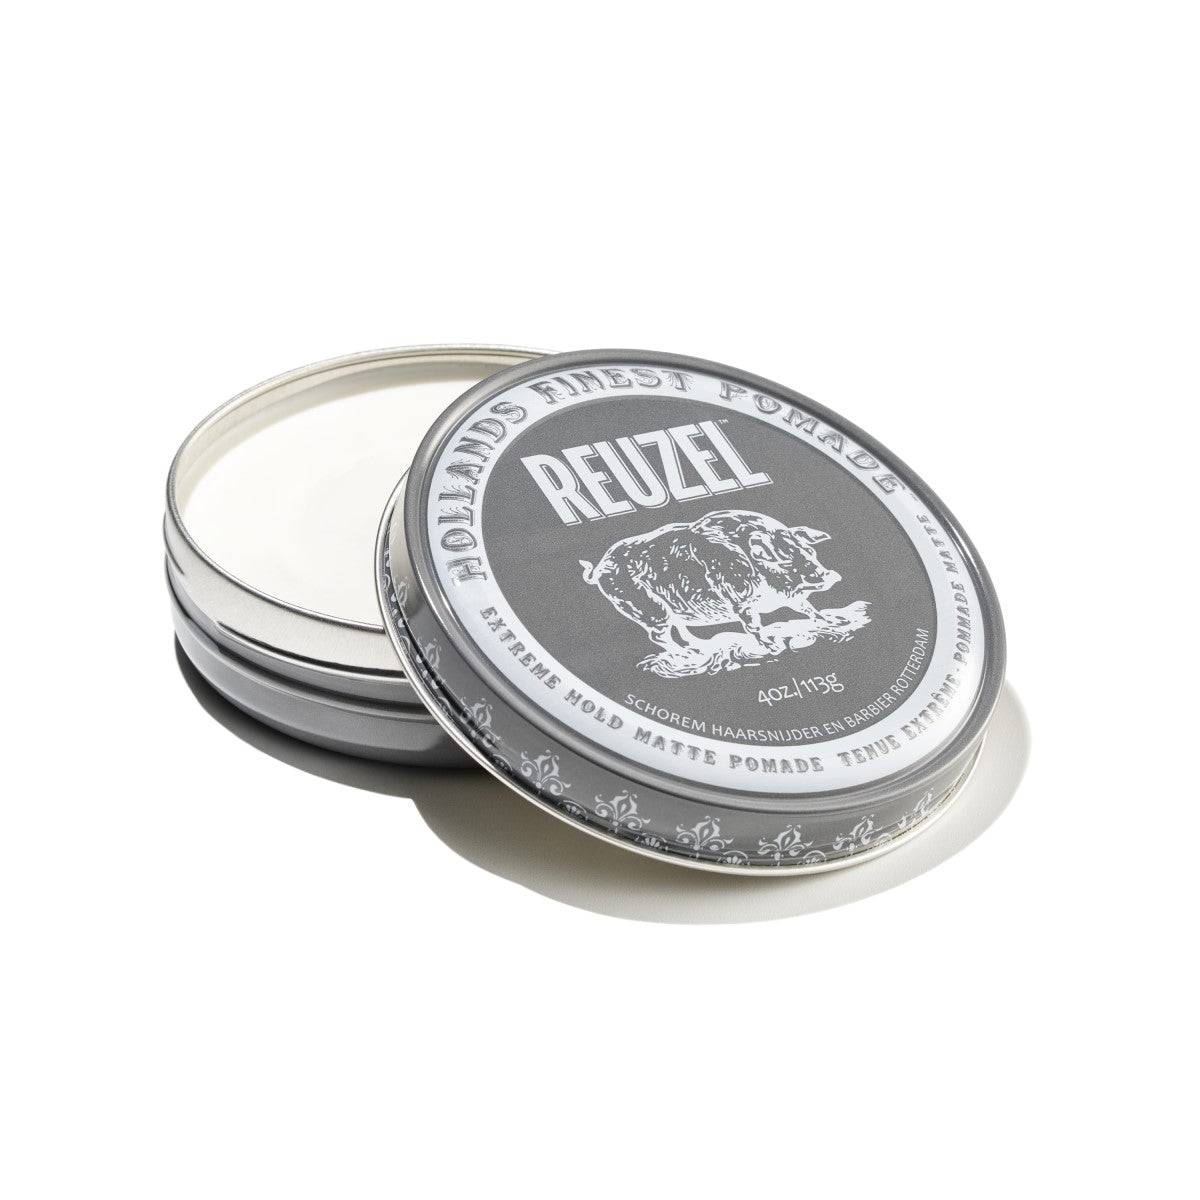 Primary Image of Extreme Hold Matte Pomade